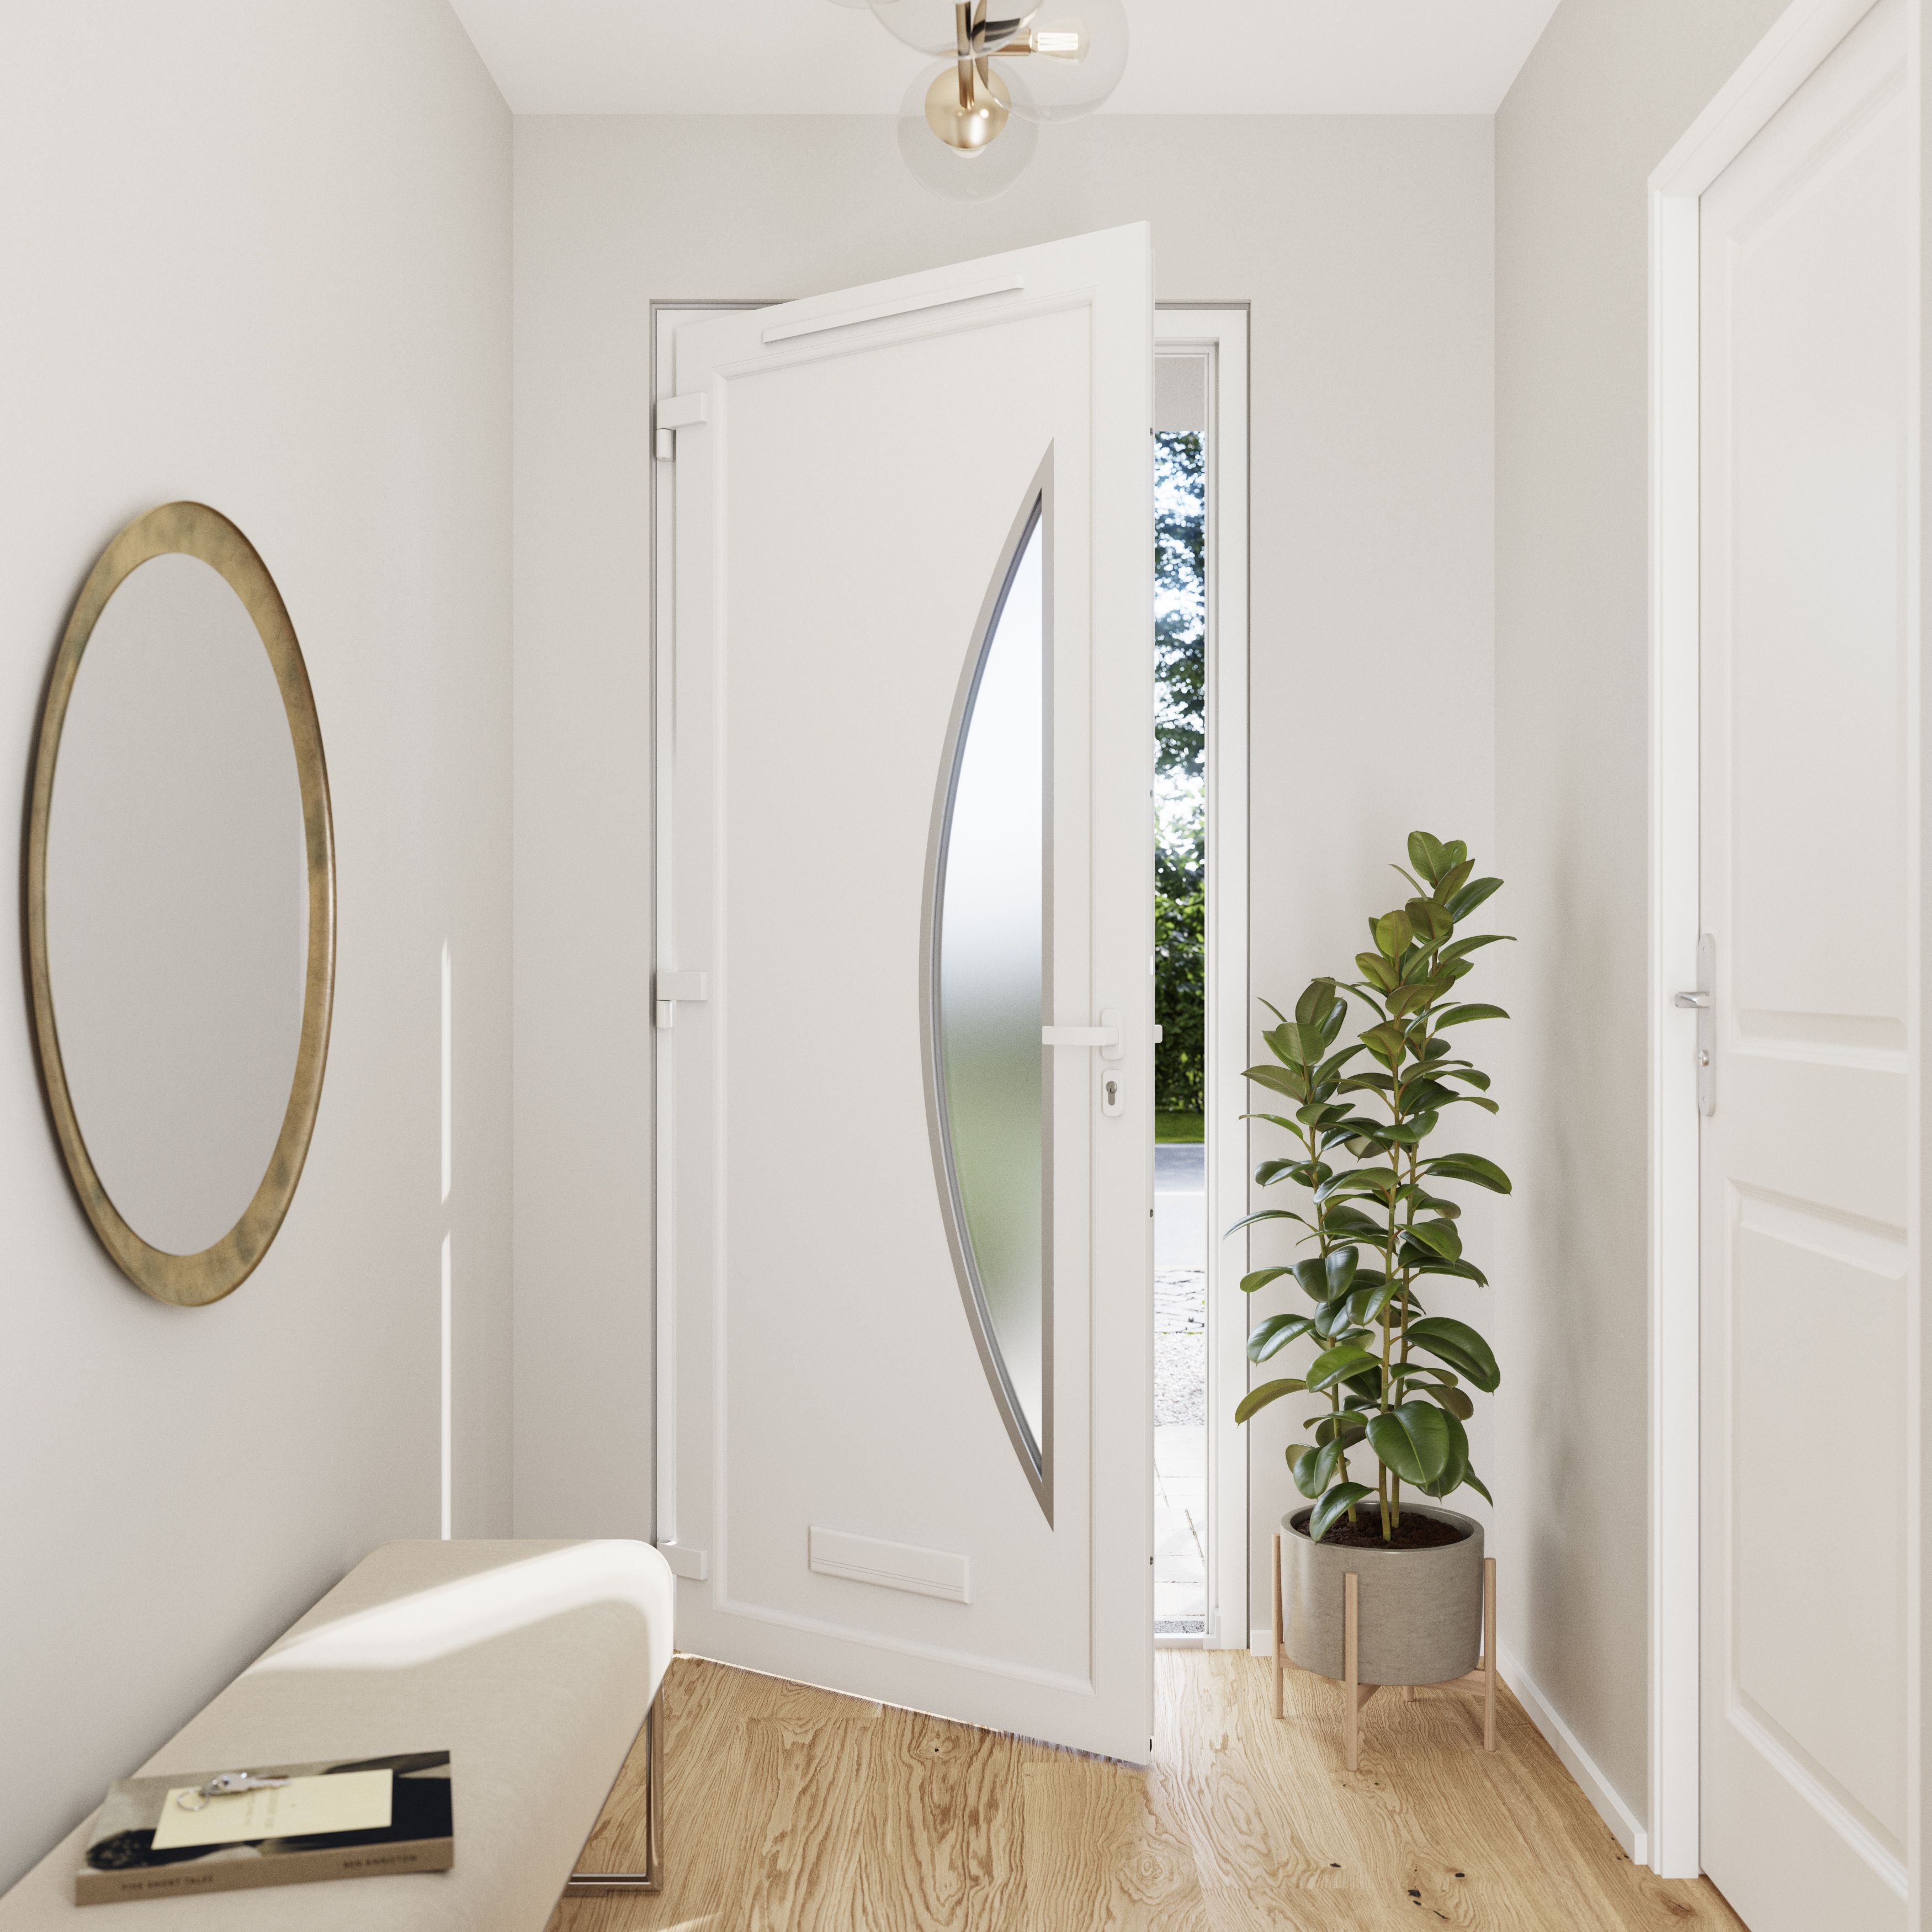 Fortia Hermoso Frosted Glazed Antracite RH External Front Door set, (H)2085mm (W)920mm